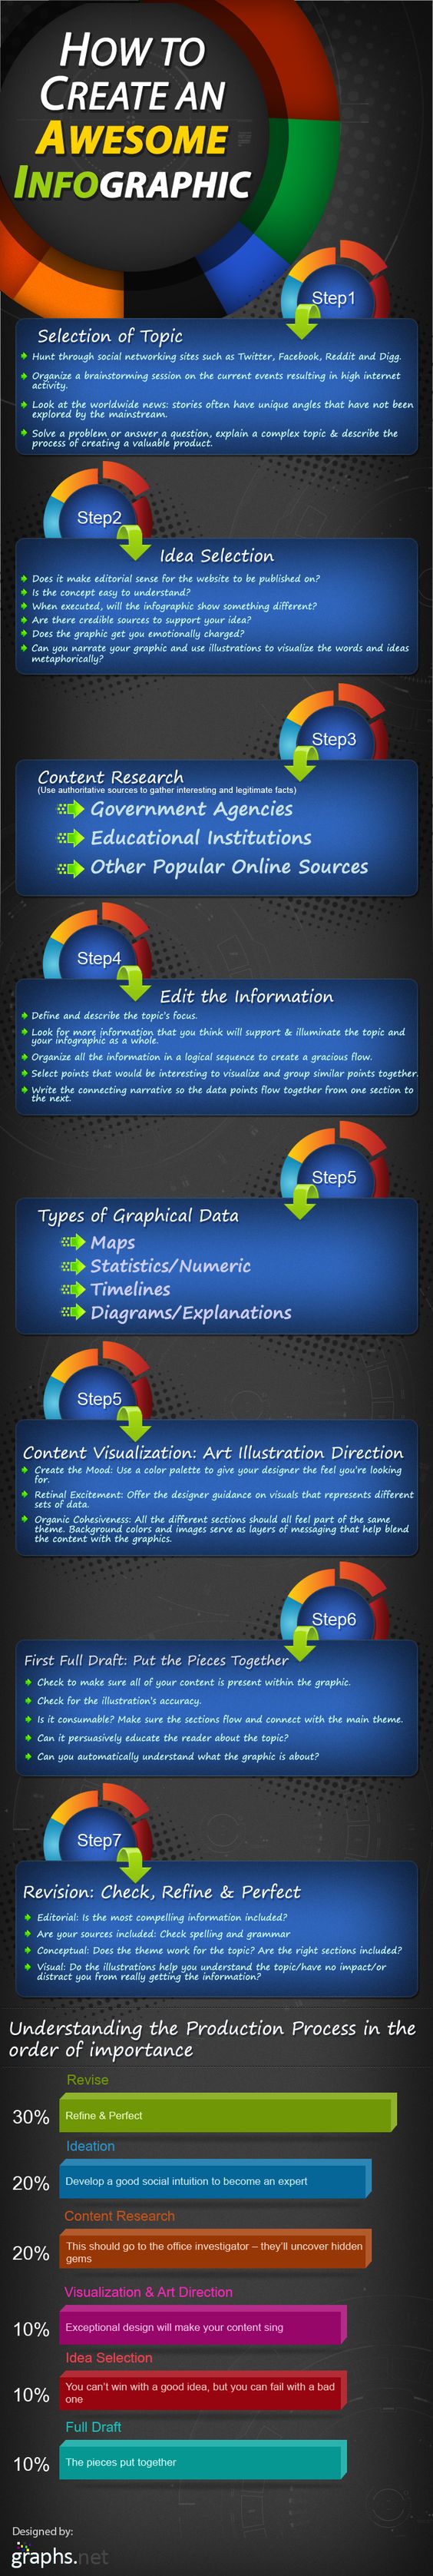 7 Key Steps to Creating an Awesome Infographic #infographic